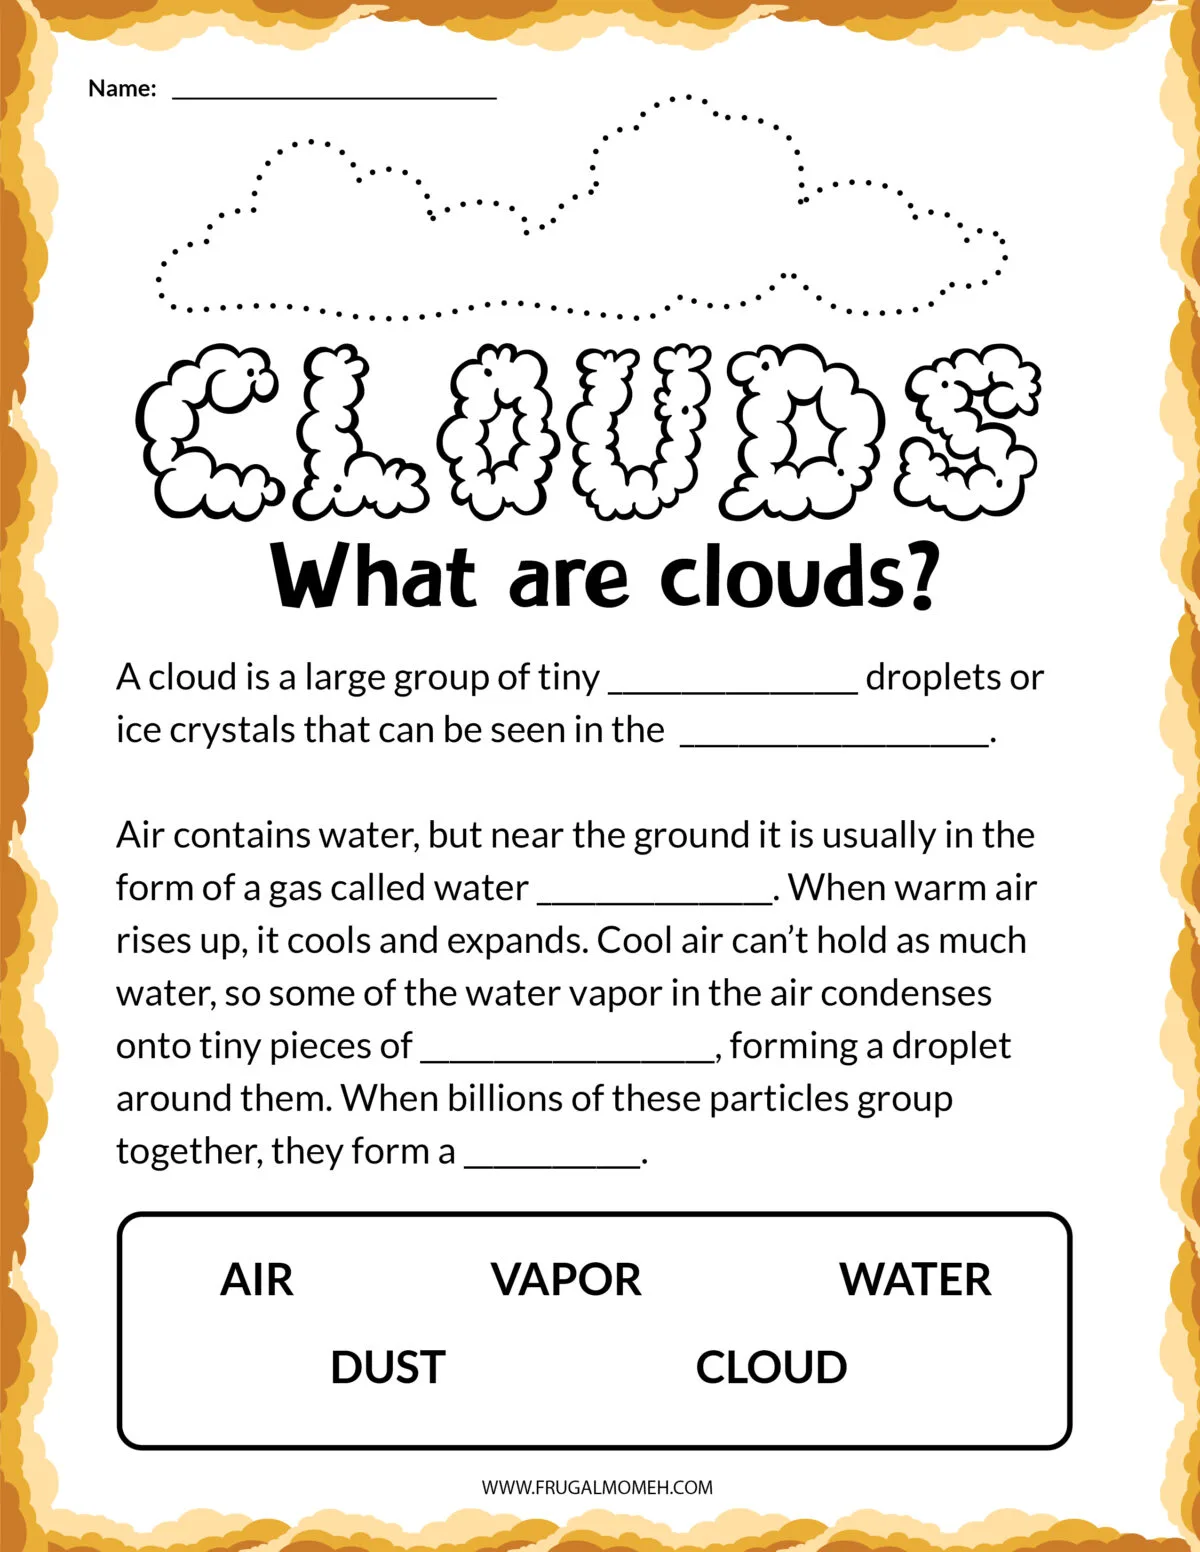 free-printable-clouds-activity-sheets-frugal-mom-eh